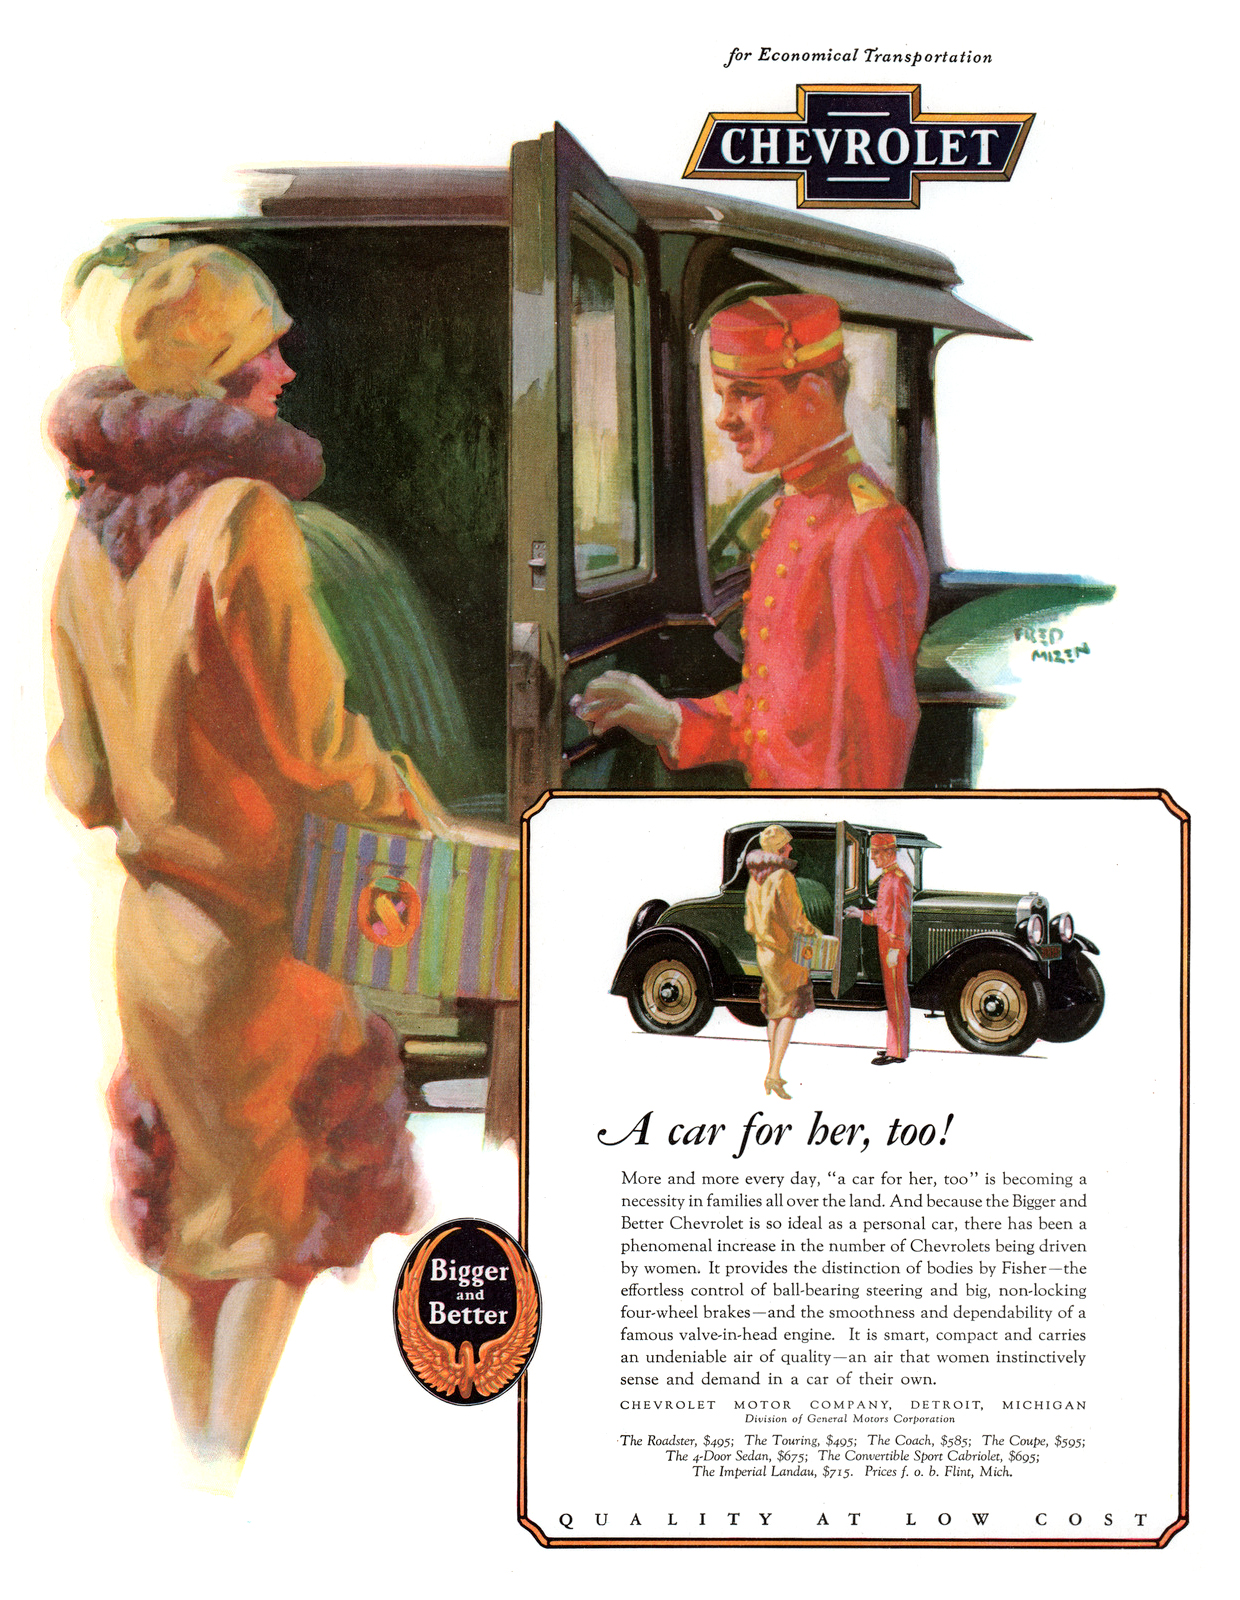 Chevrolet Ad (October, 1928): A car for her, too! - Illustrated by Fred Mizen